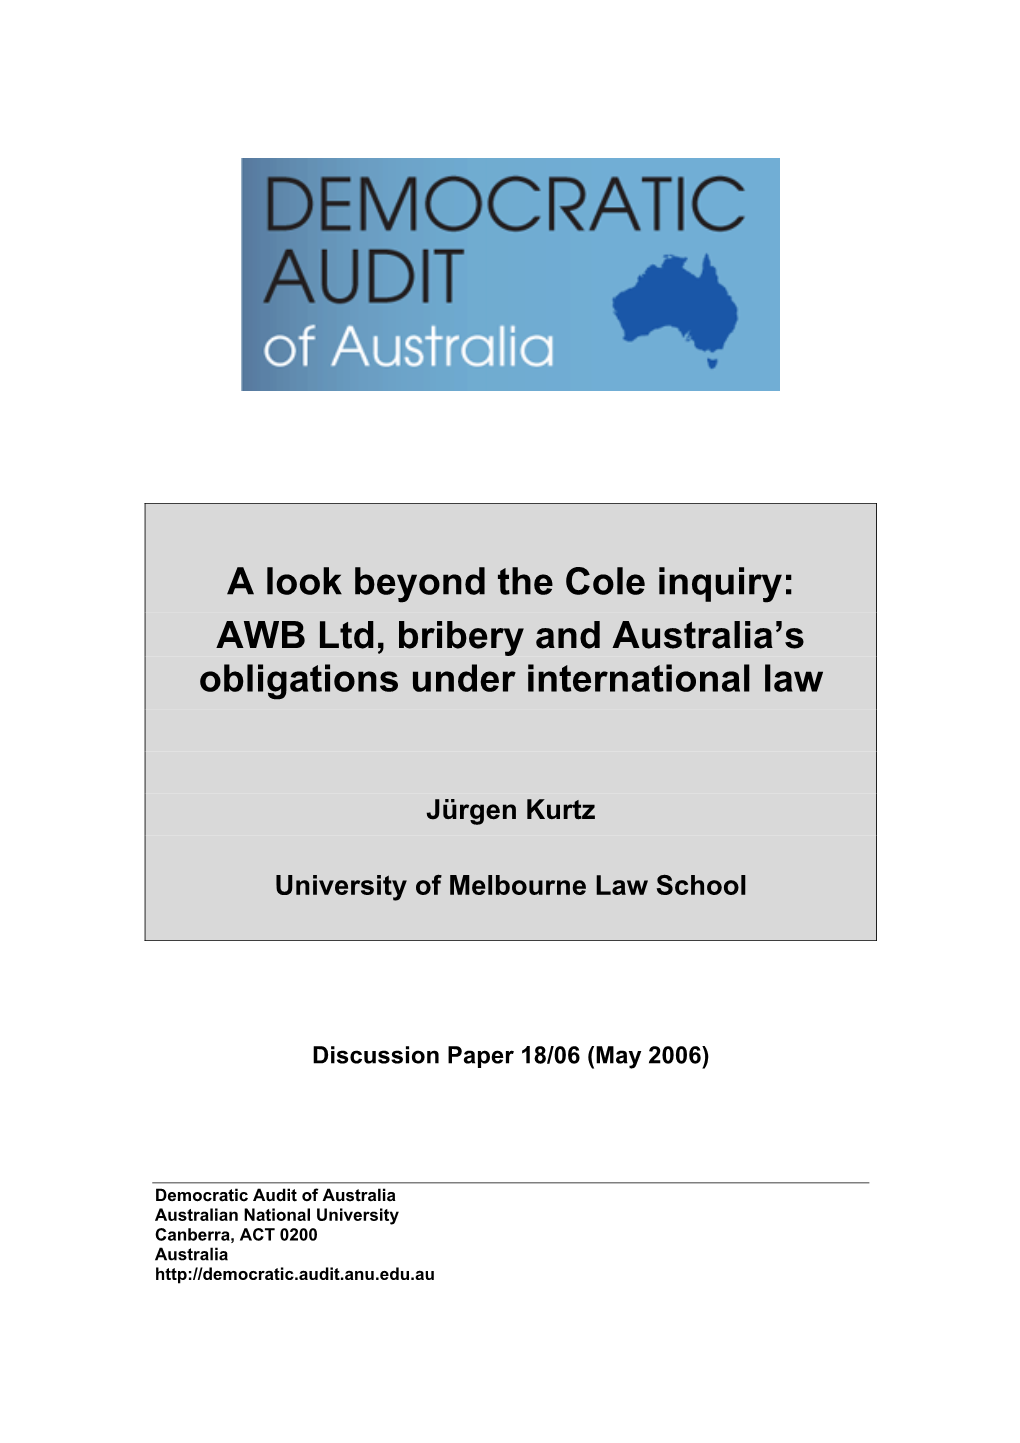 A Look Beyond the Cole Inquiry: AWB Ltd, Bribery and Australia's